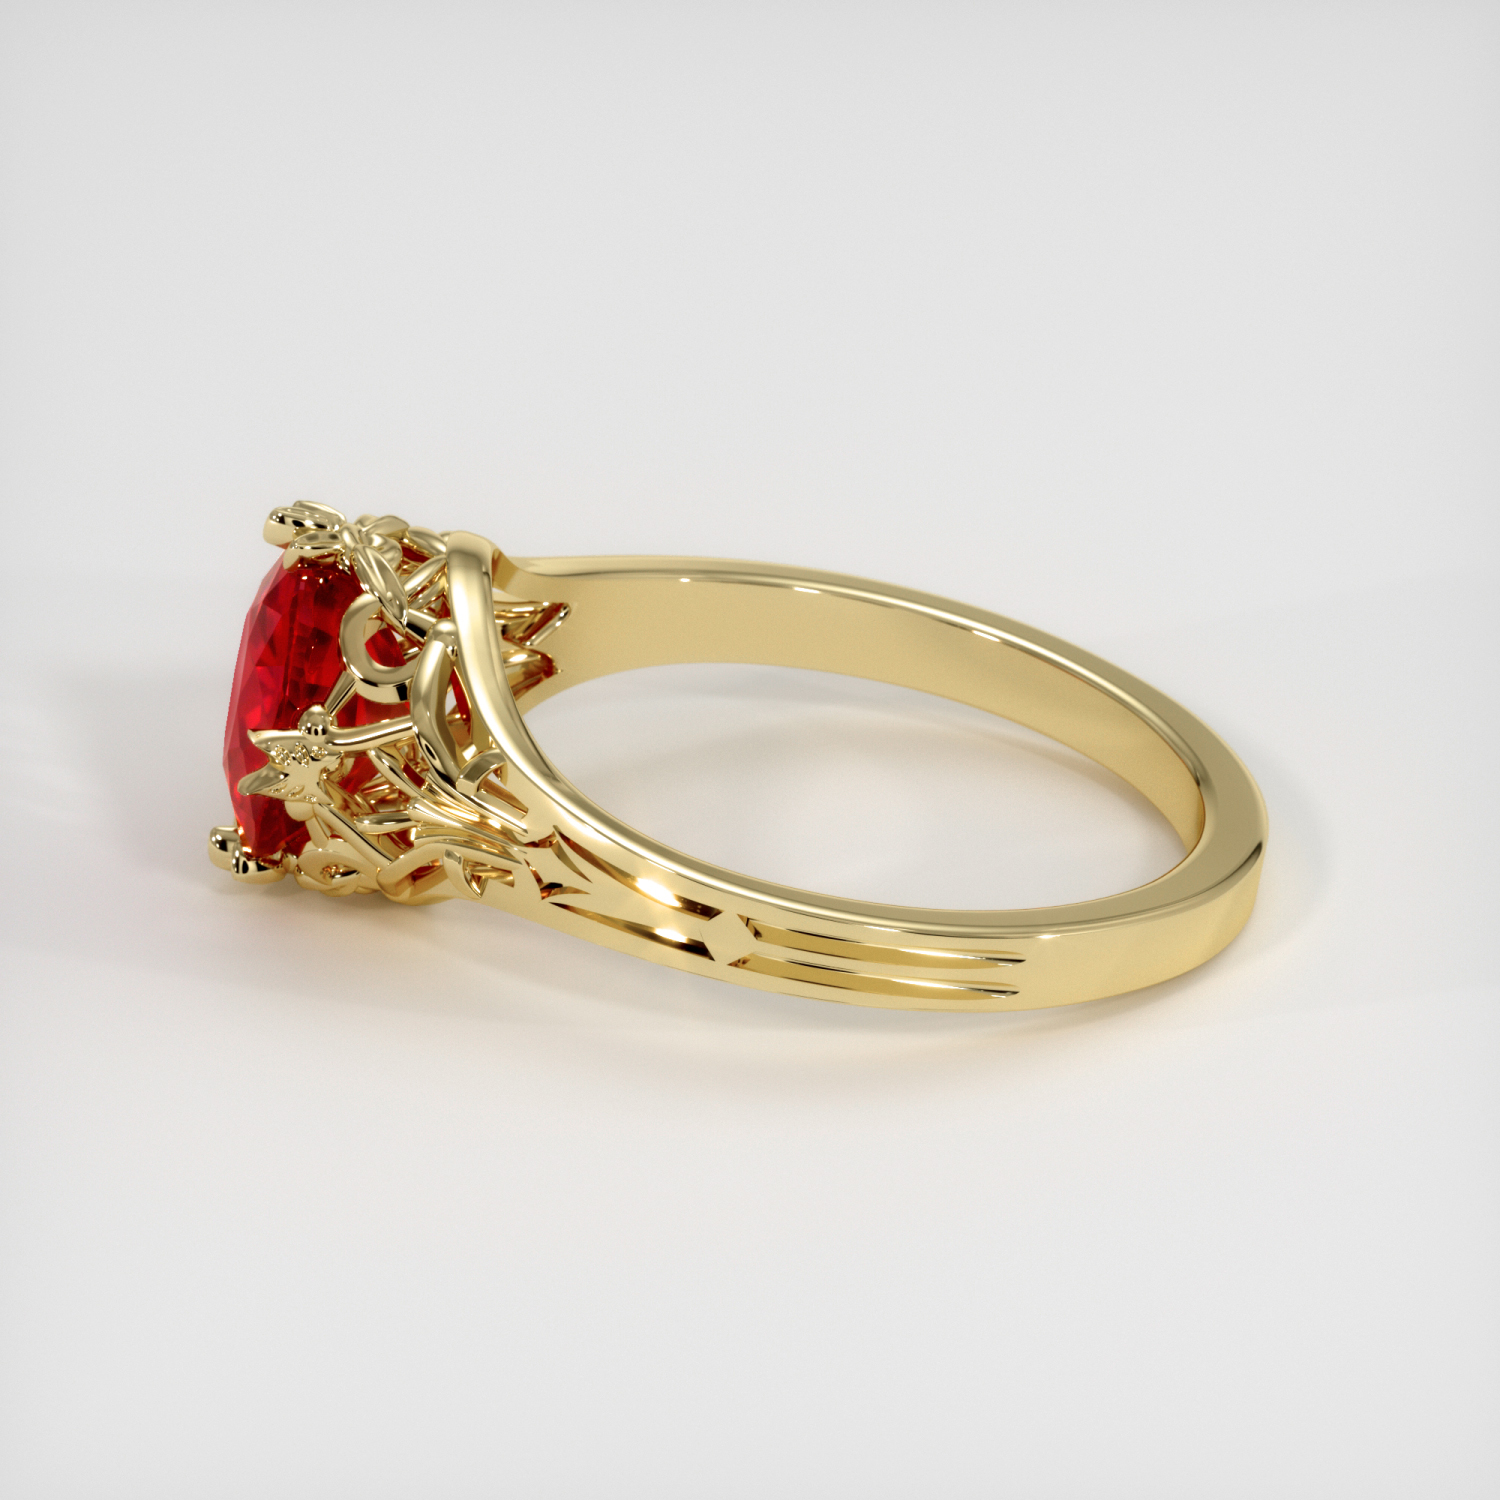 Antique Style Ruby Ring 1.67 Ct., 18K Yellow Gold